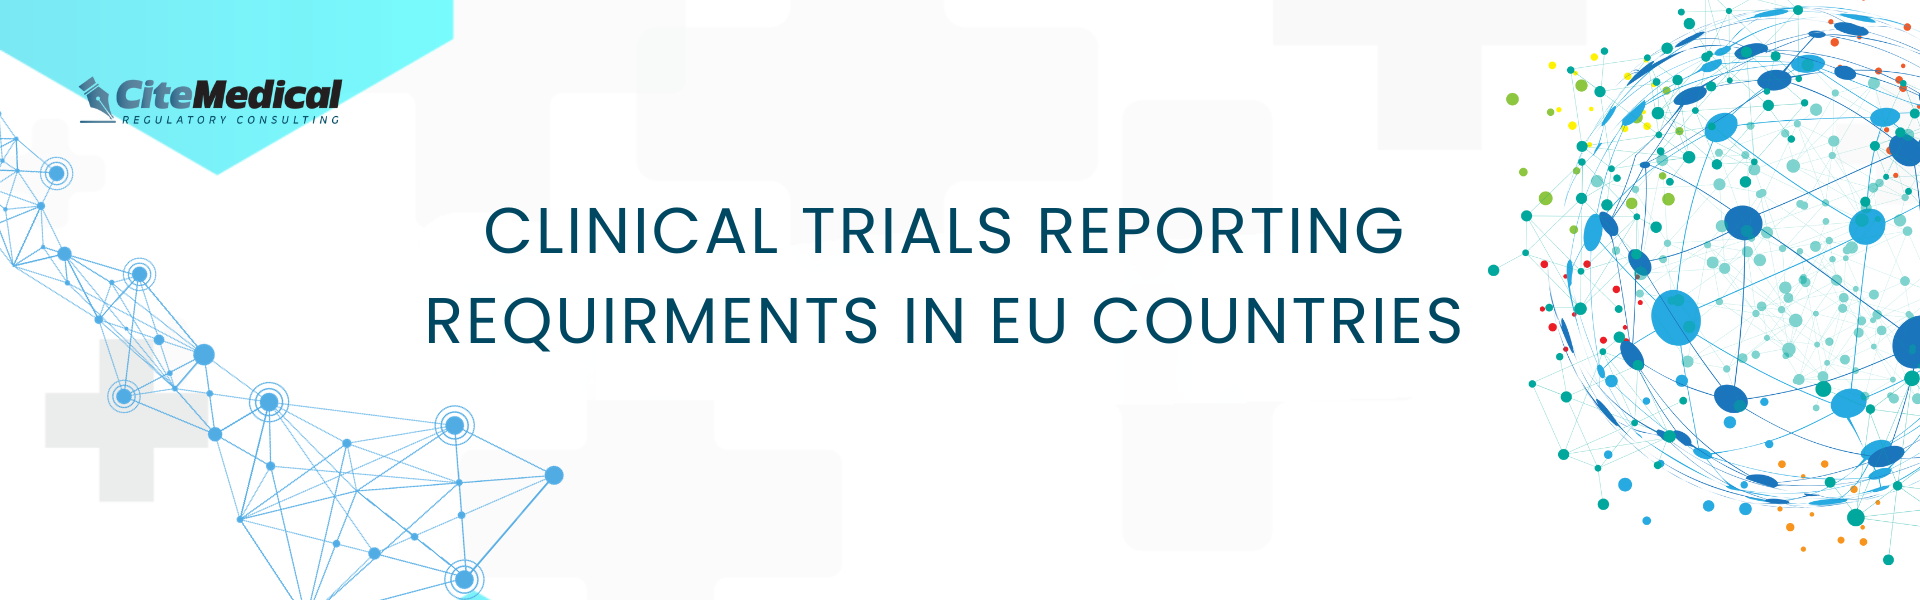 Clinical Trials Reporting Requirements in EU Countries